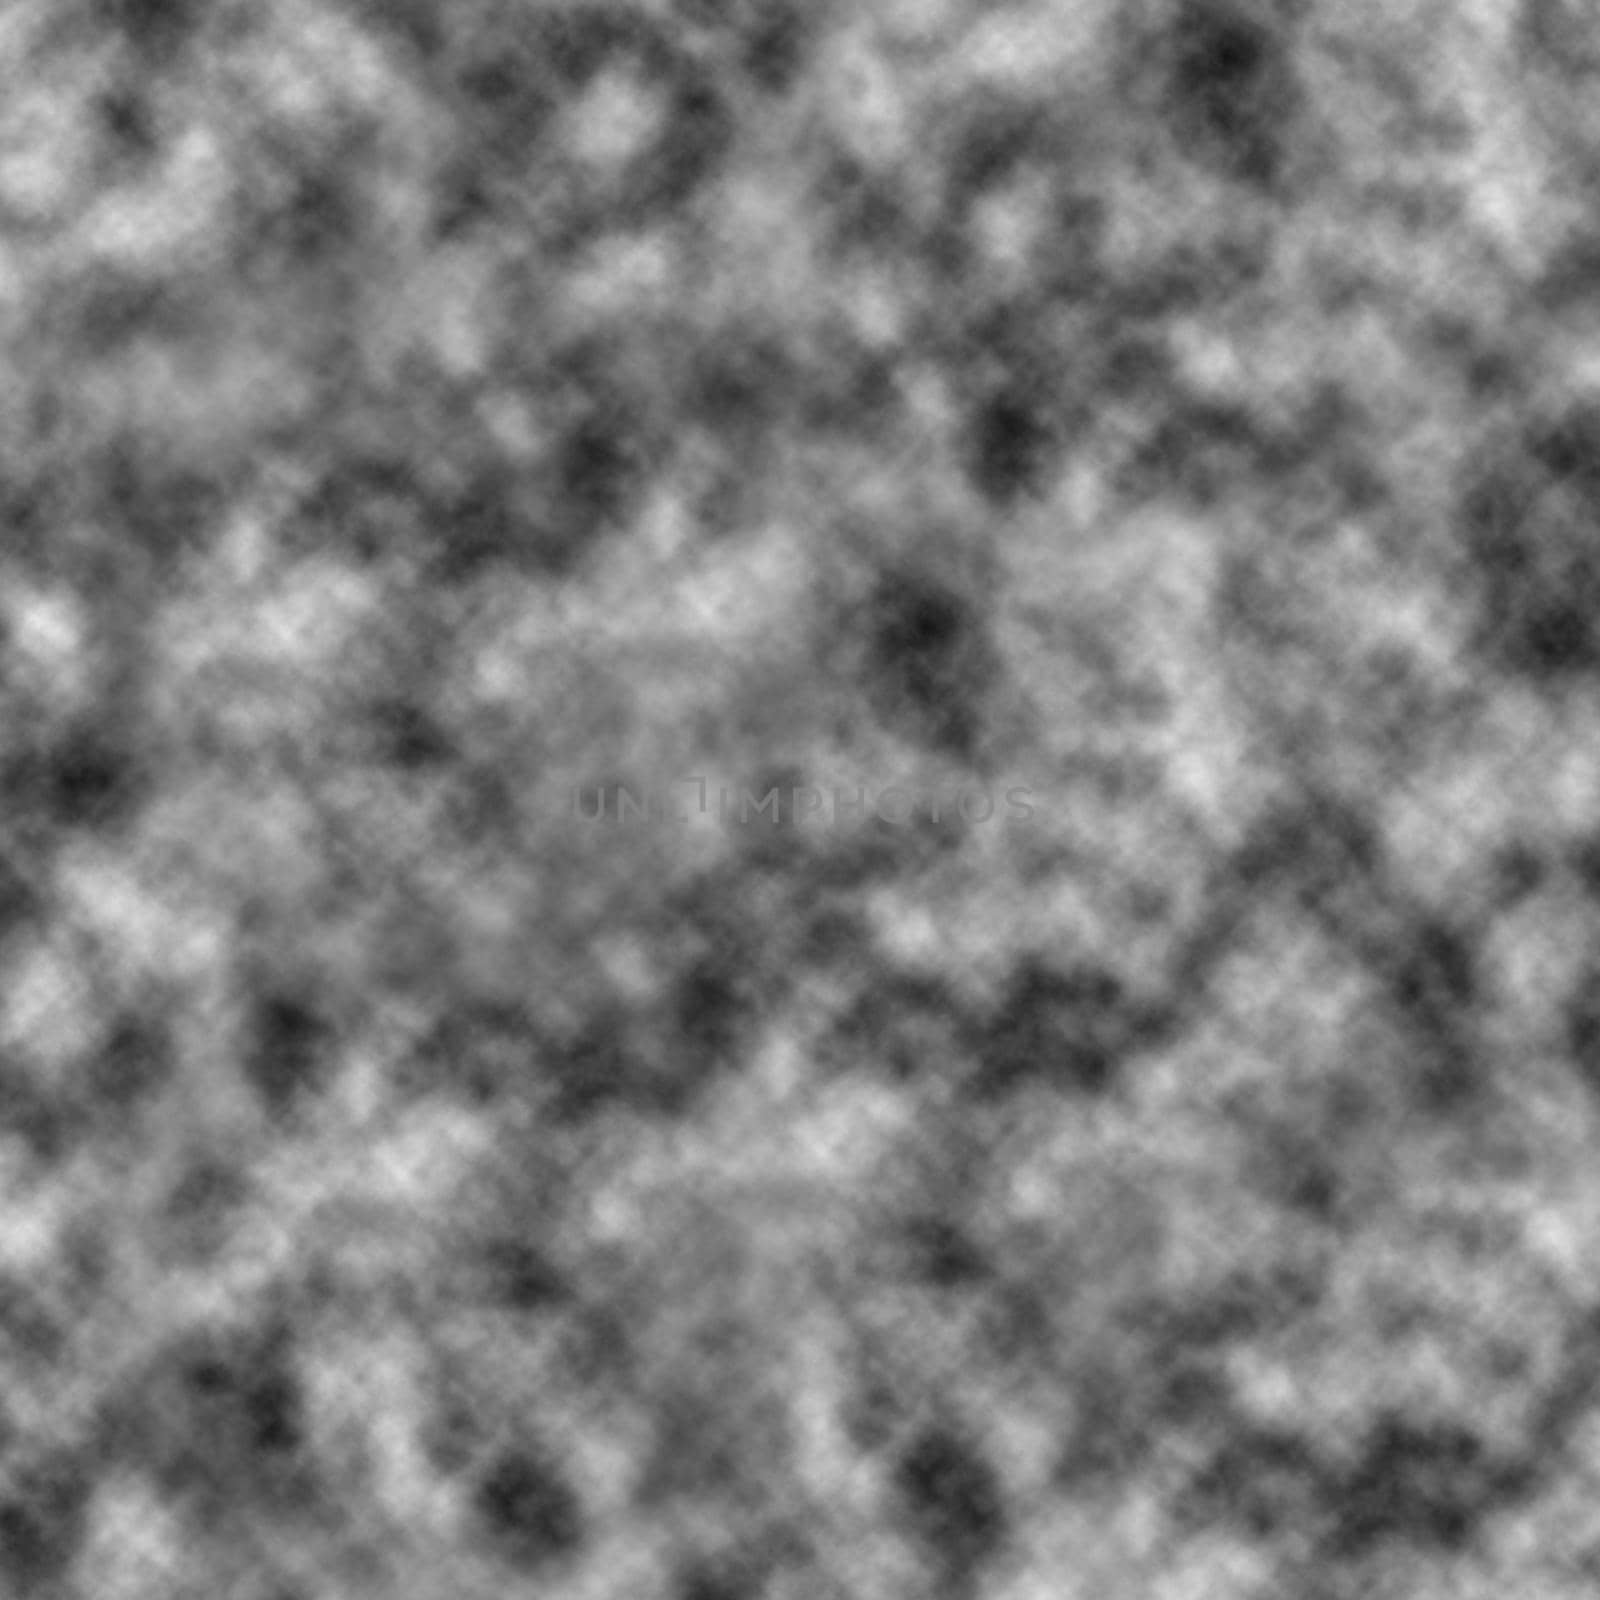 Unfocused gray-white spots on the surface of the paper.Texture or background